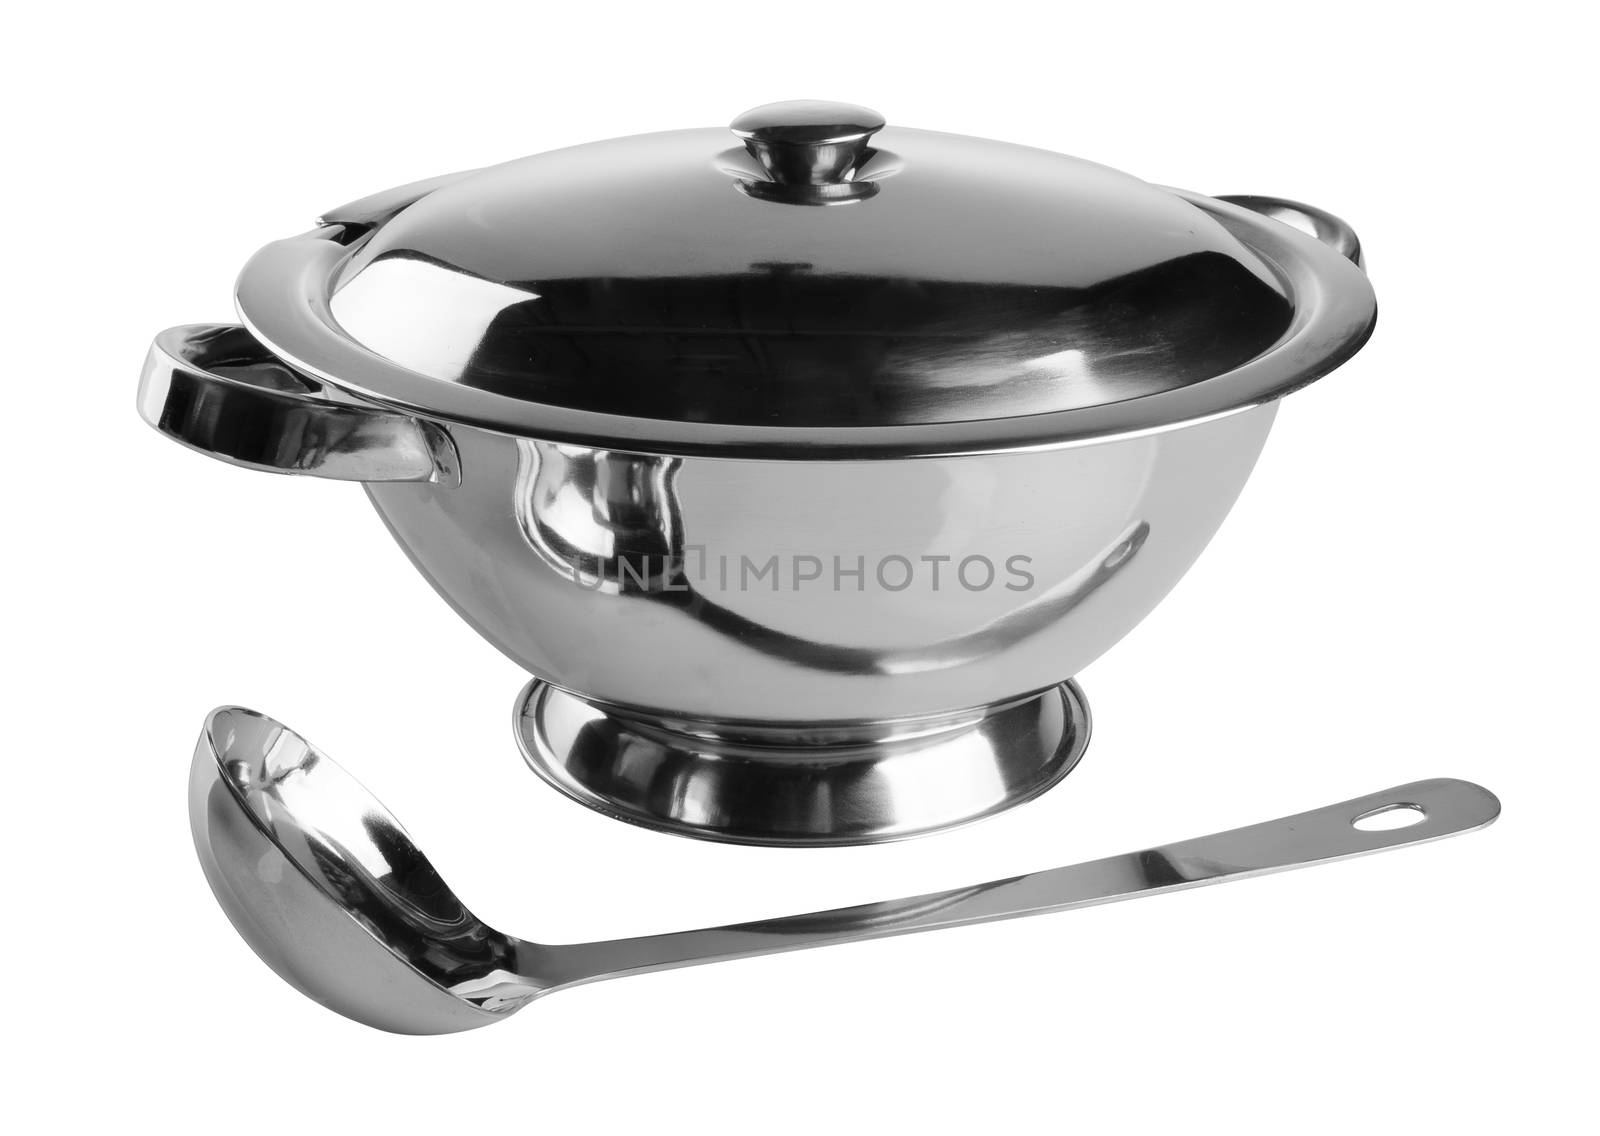 pot. stainless steel pot on background. stainless steel pot on a background